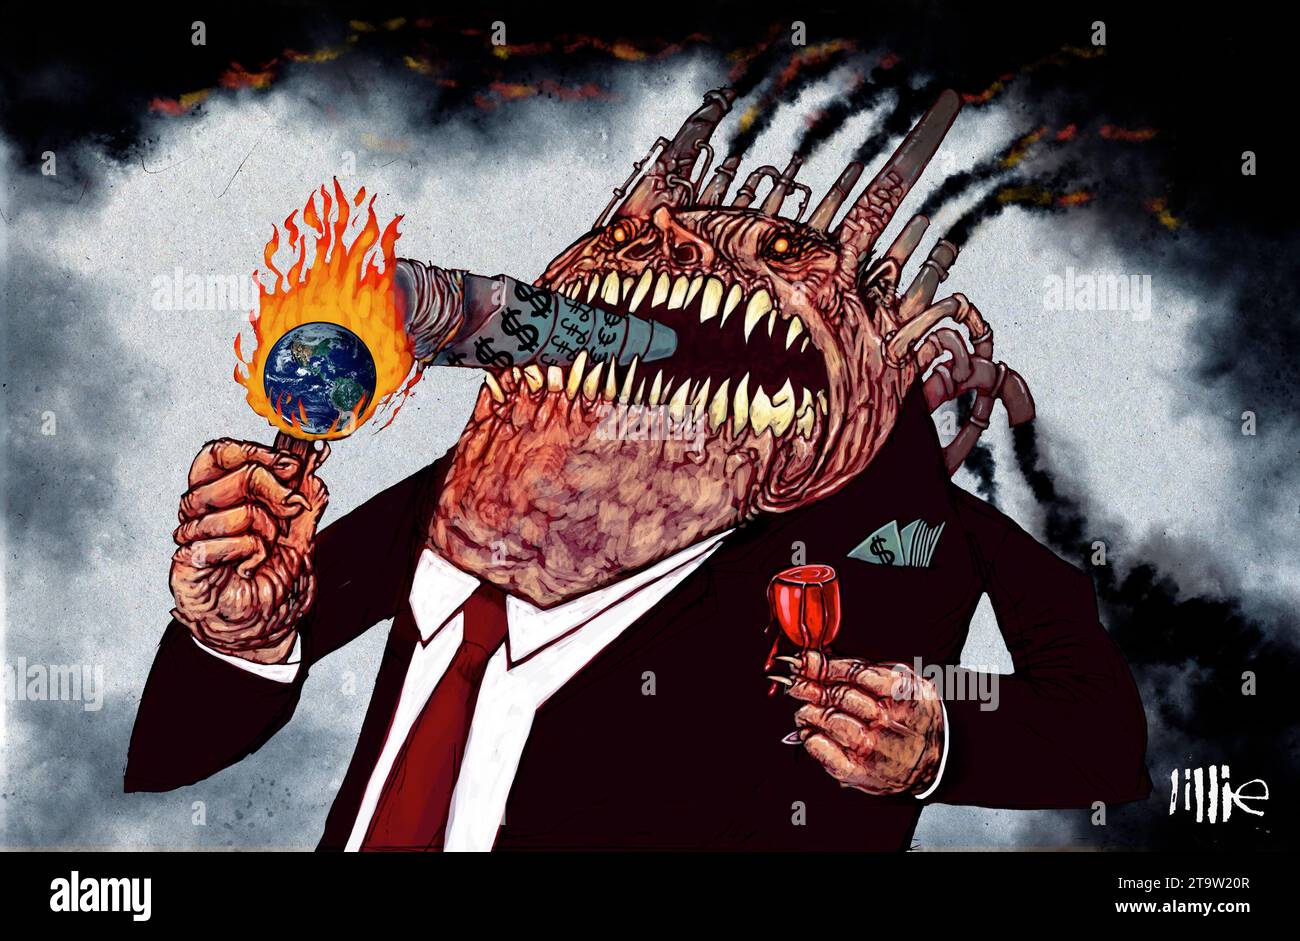 Satirical art, figure rep. polluting industry, wealthy nations, greed, smokes cigar that burns the planet, glass overflows with blood, climate crisis. Stock Photo